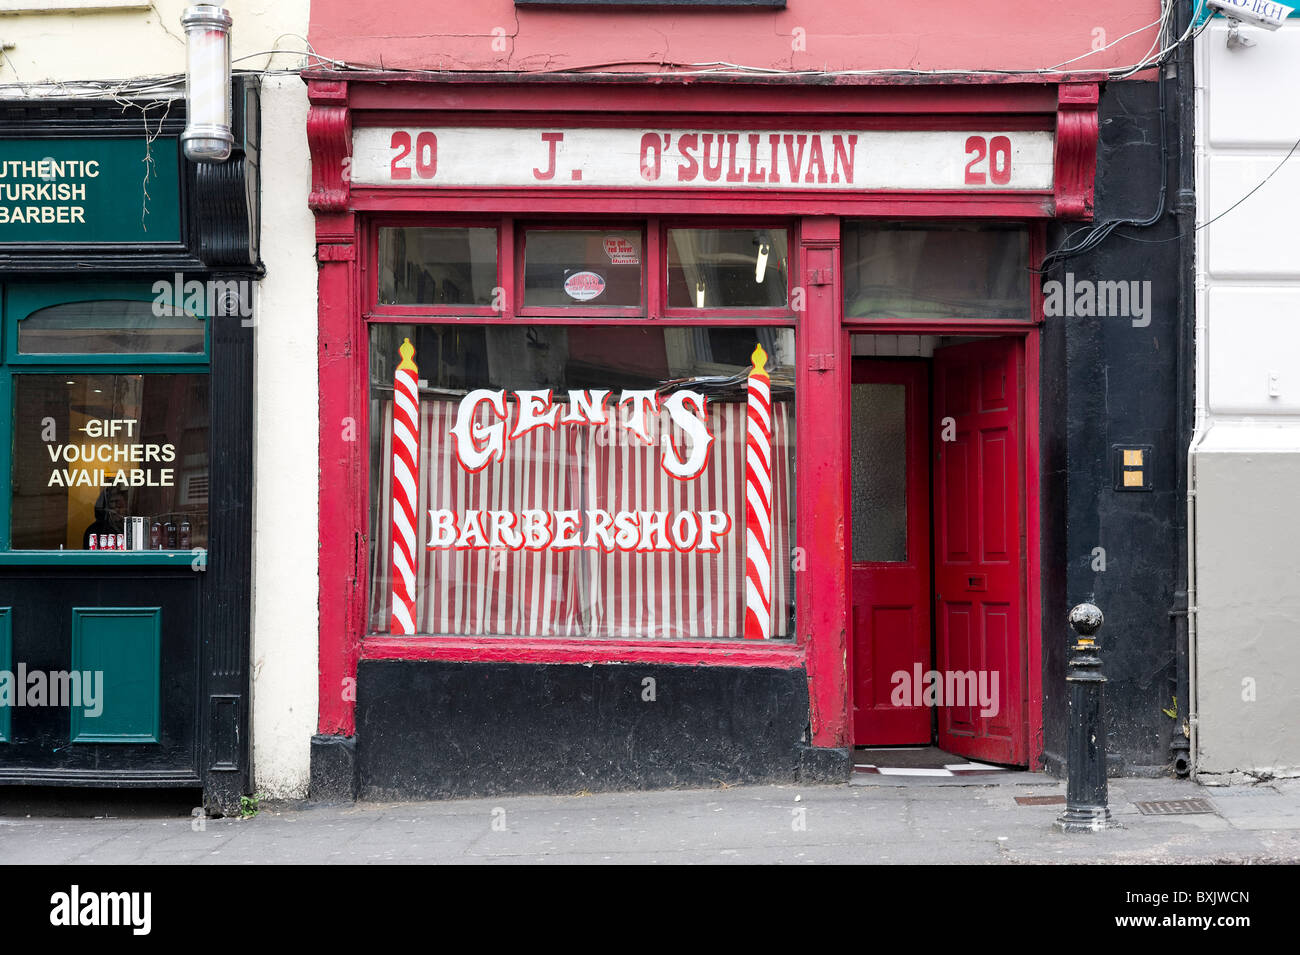 Traditionelle Barbershop in Cork, County Cork, Irland Stockfoto